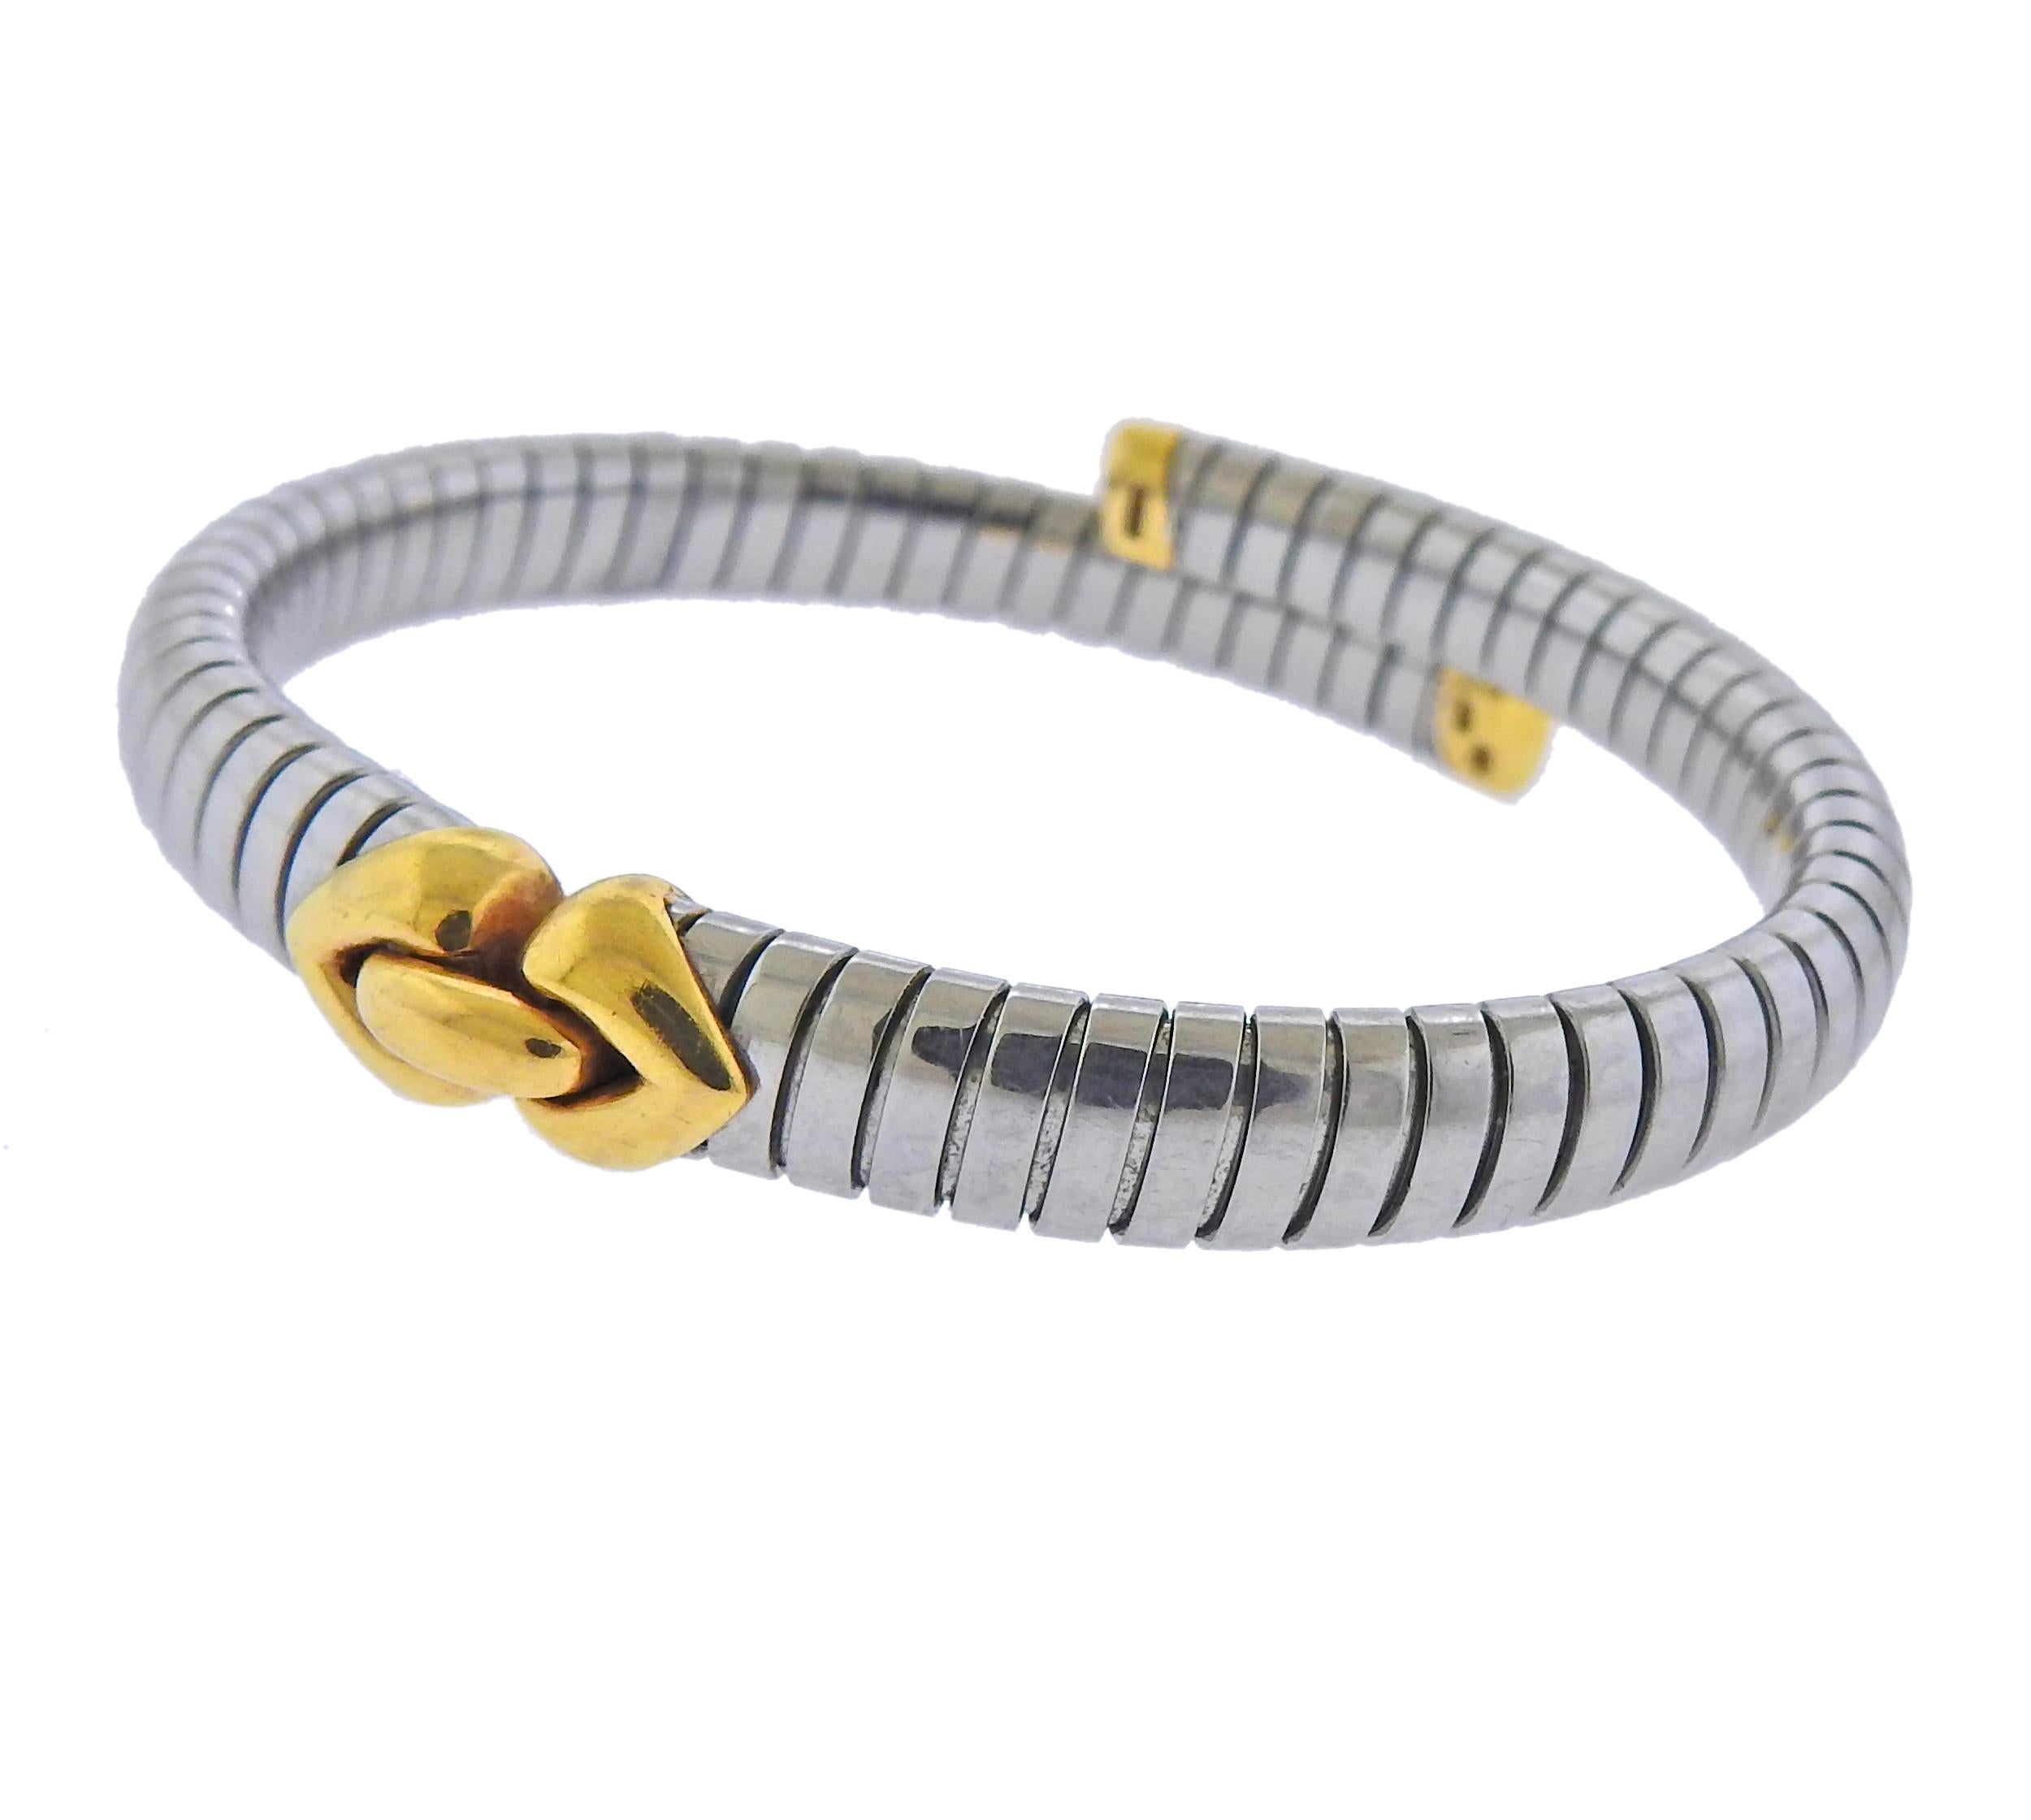 18k gold and steel Alveare Tubogas bracelet by Bvlgari. Bracelet will fit approx. 7